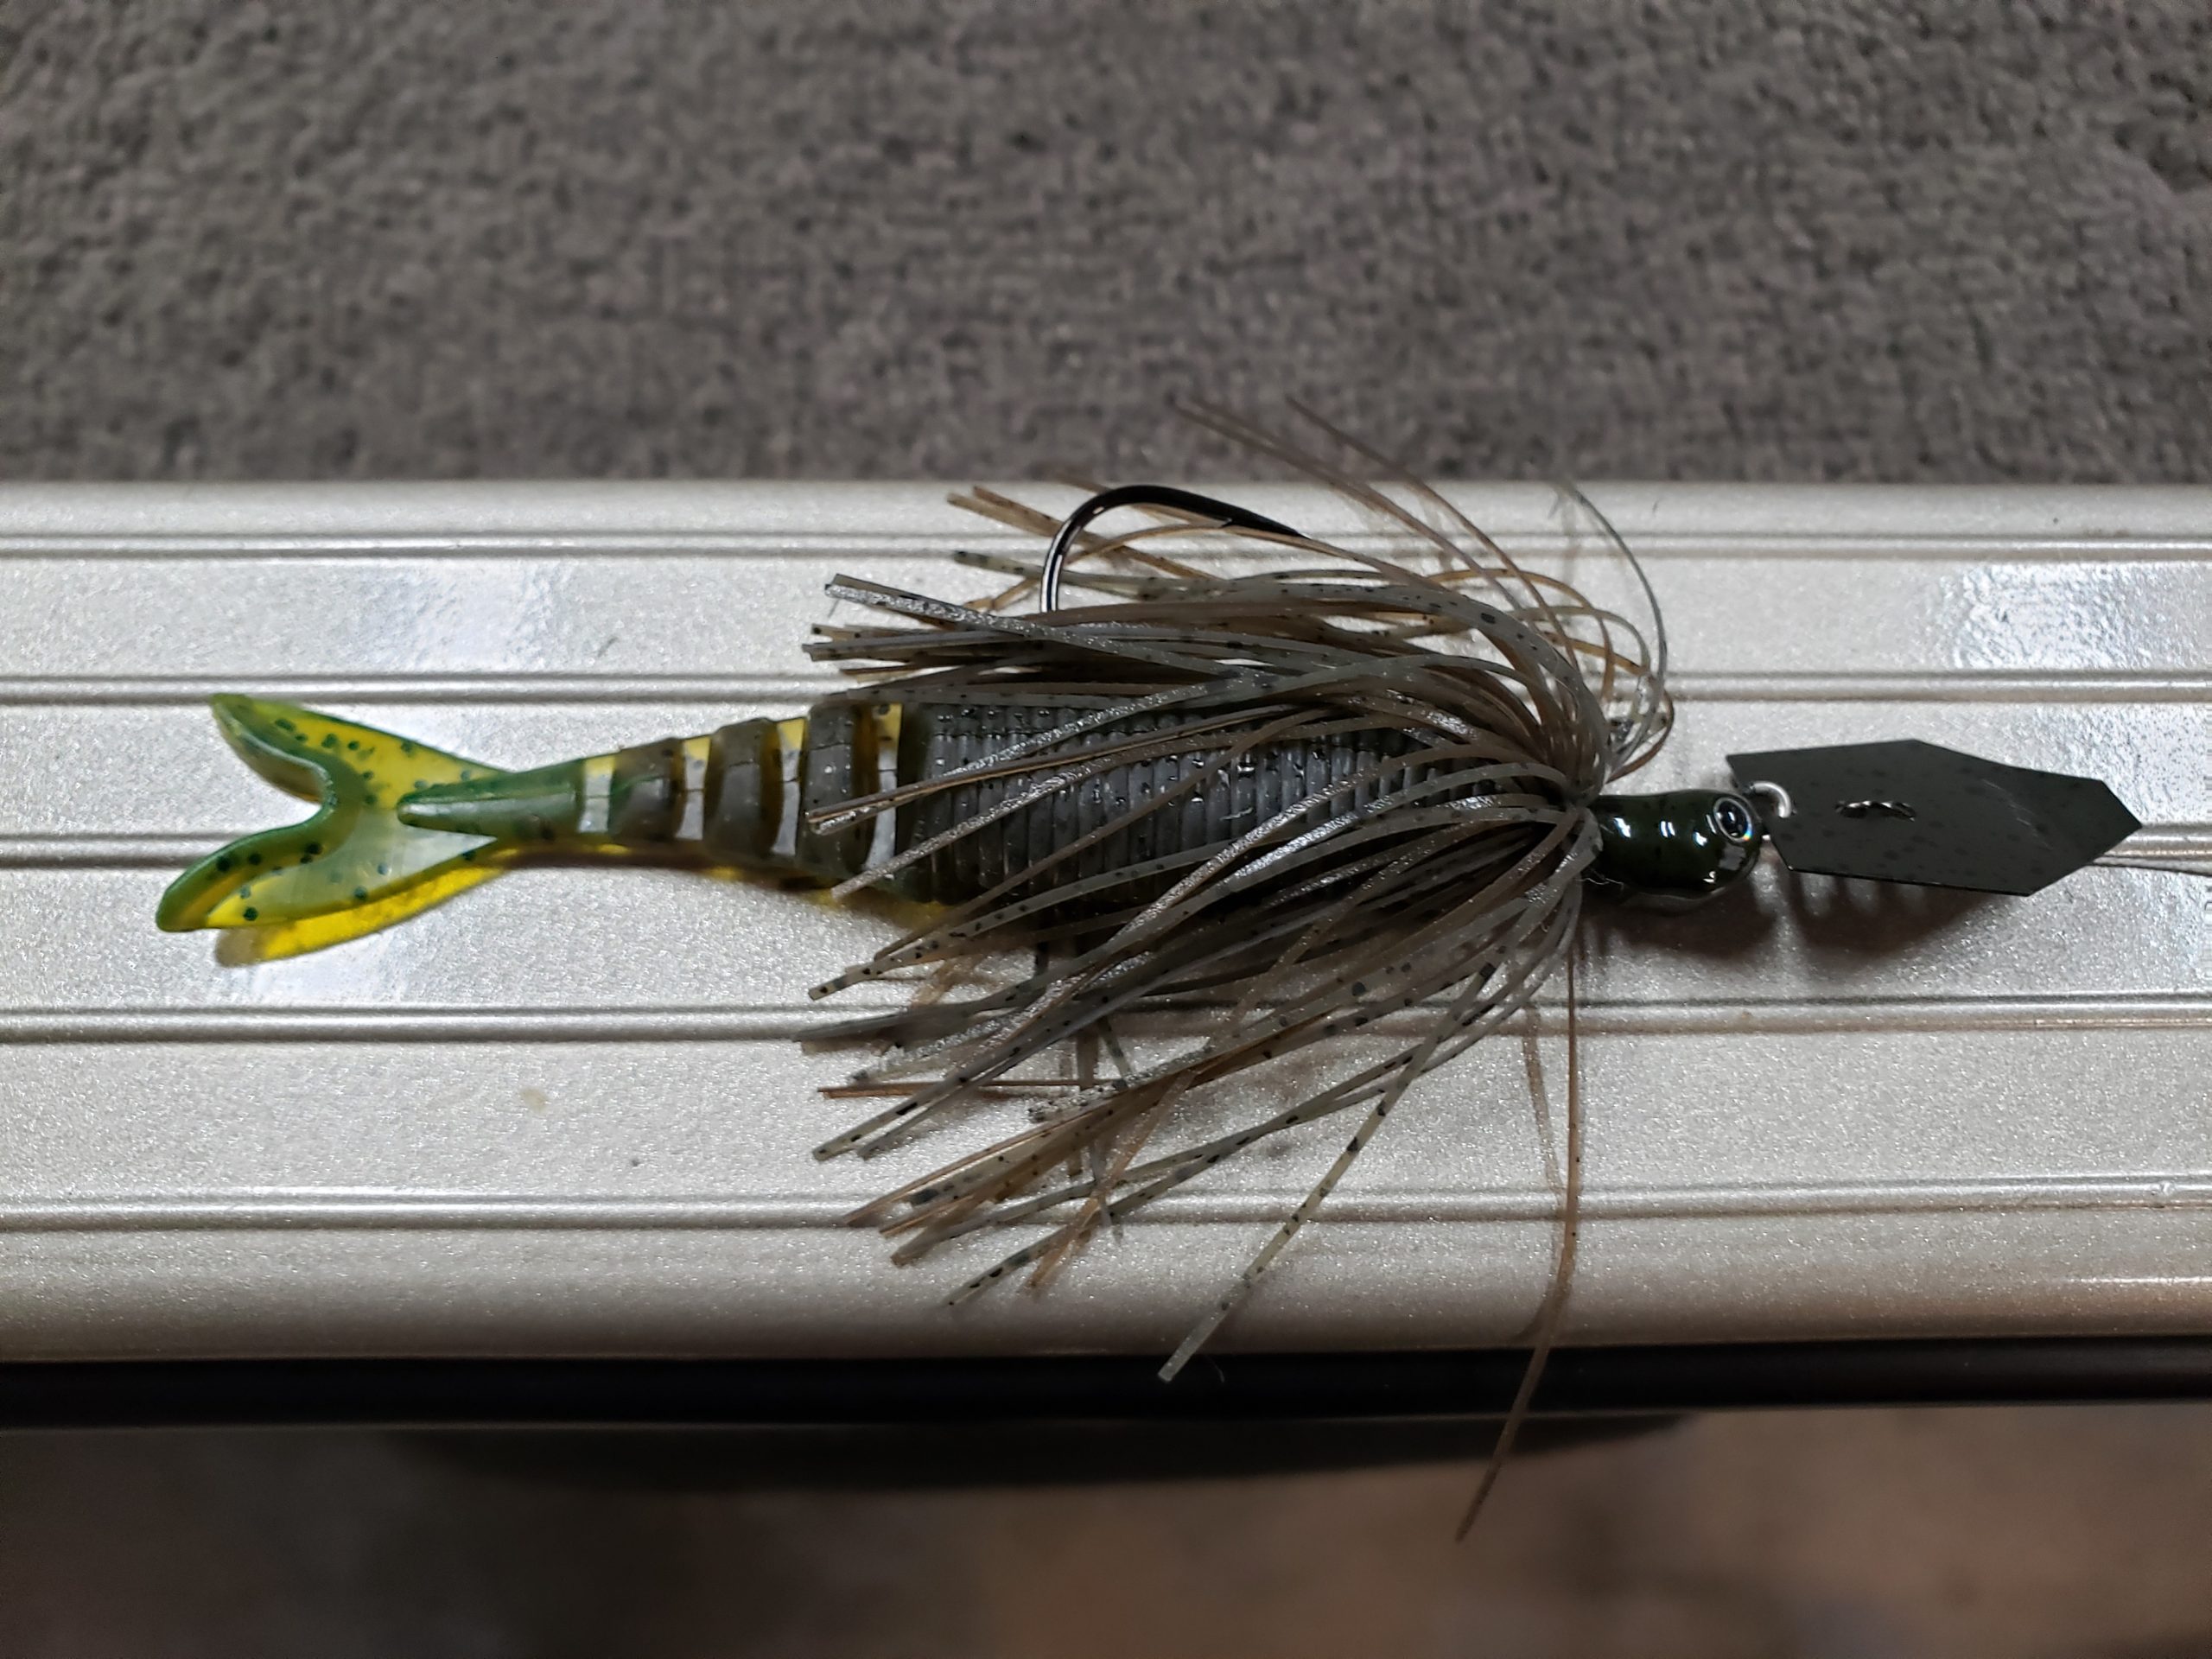 Let's Chat About Chatters - Top Bladed Jigs and Trailers in 2020